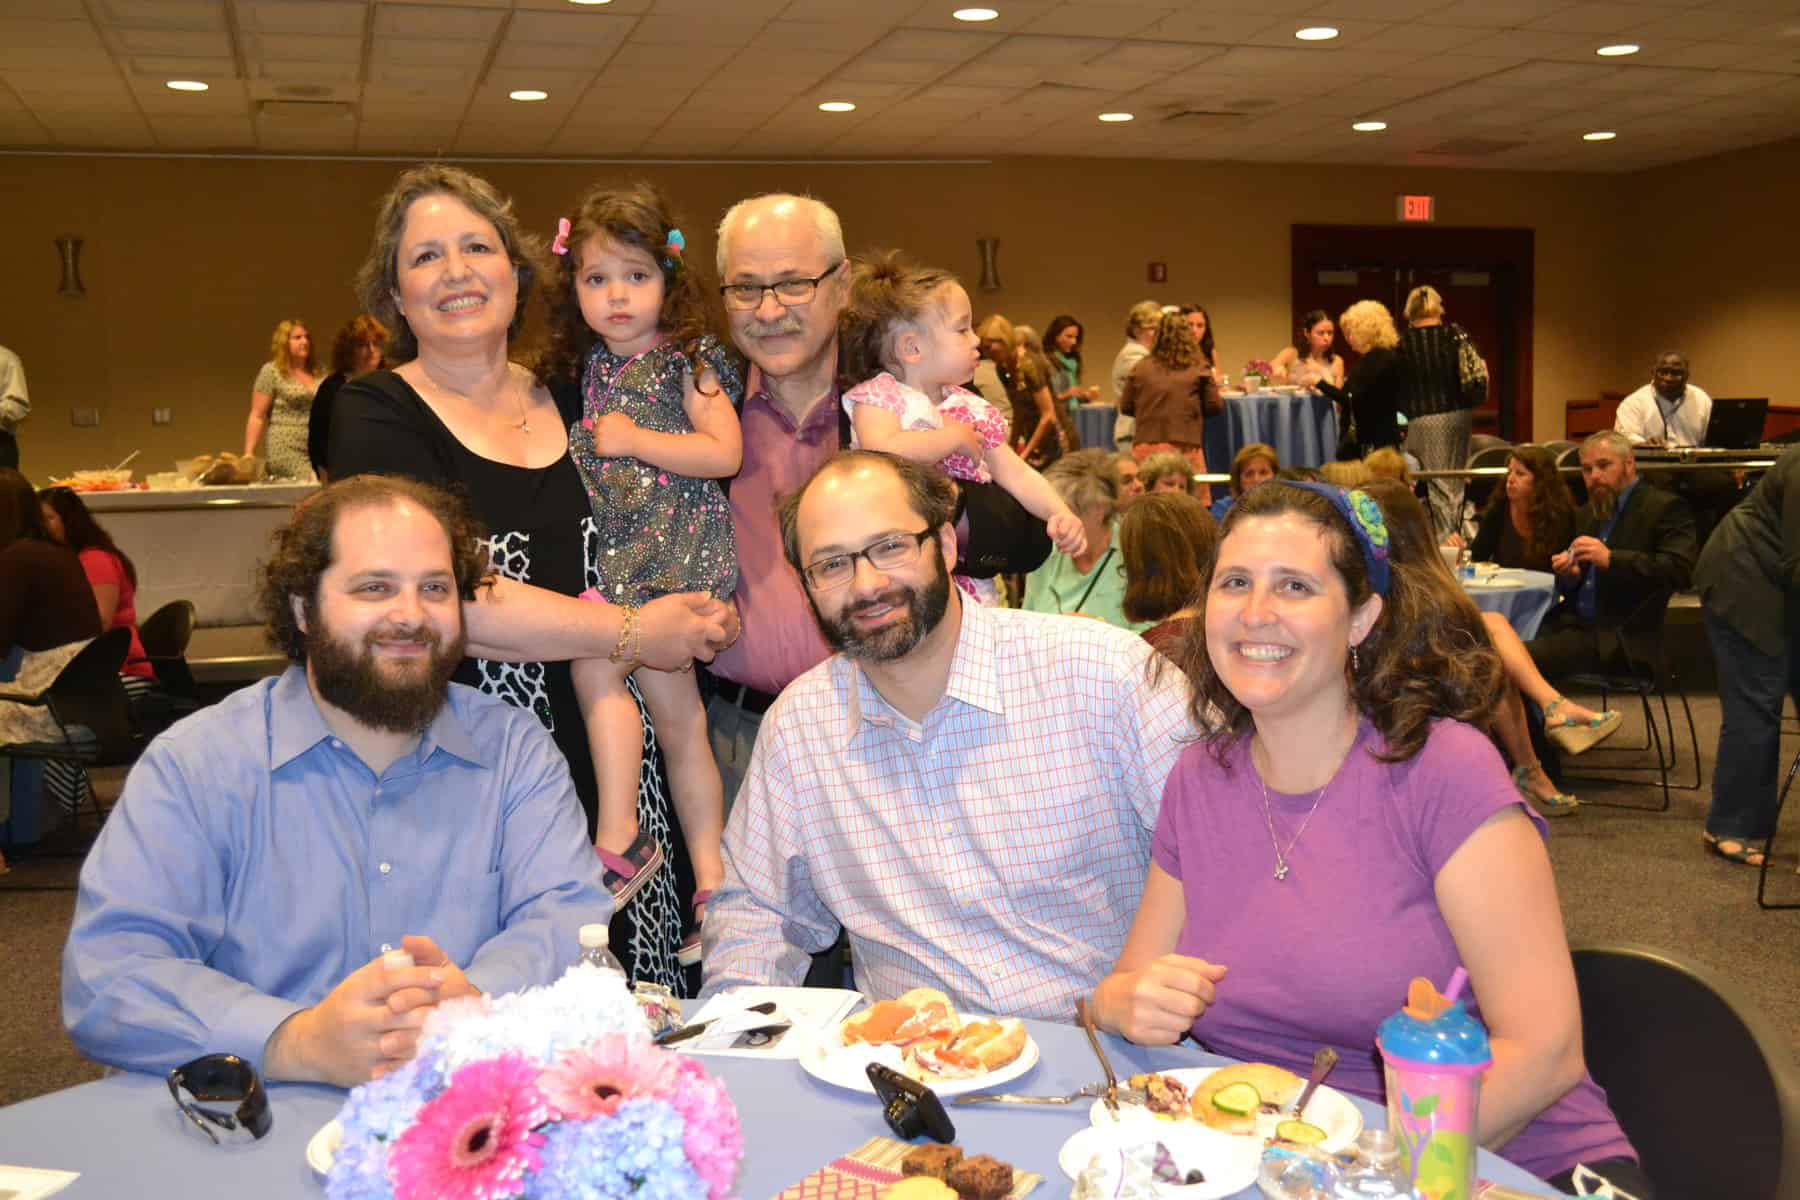 Alene Jo Kaufman (holding granddaughter, Maya), husband Ron Kaufman (holding granddaughter Lillian), and (seated) sons Adam and Jason Kaufman, and daughter-in-law Jessica Kaufman at the brunch.